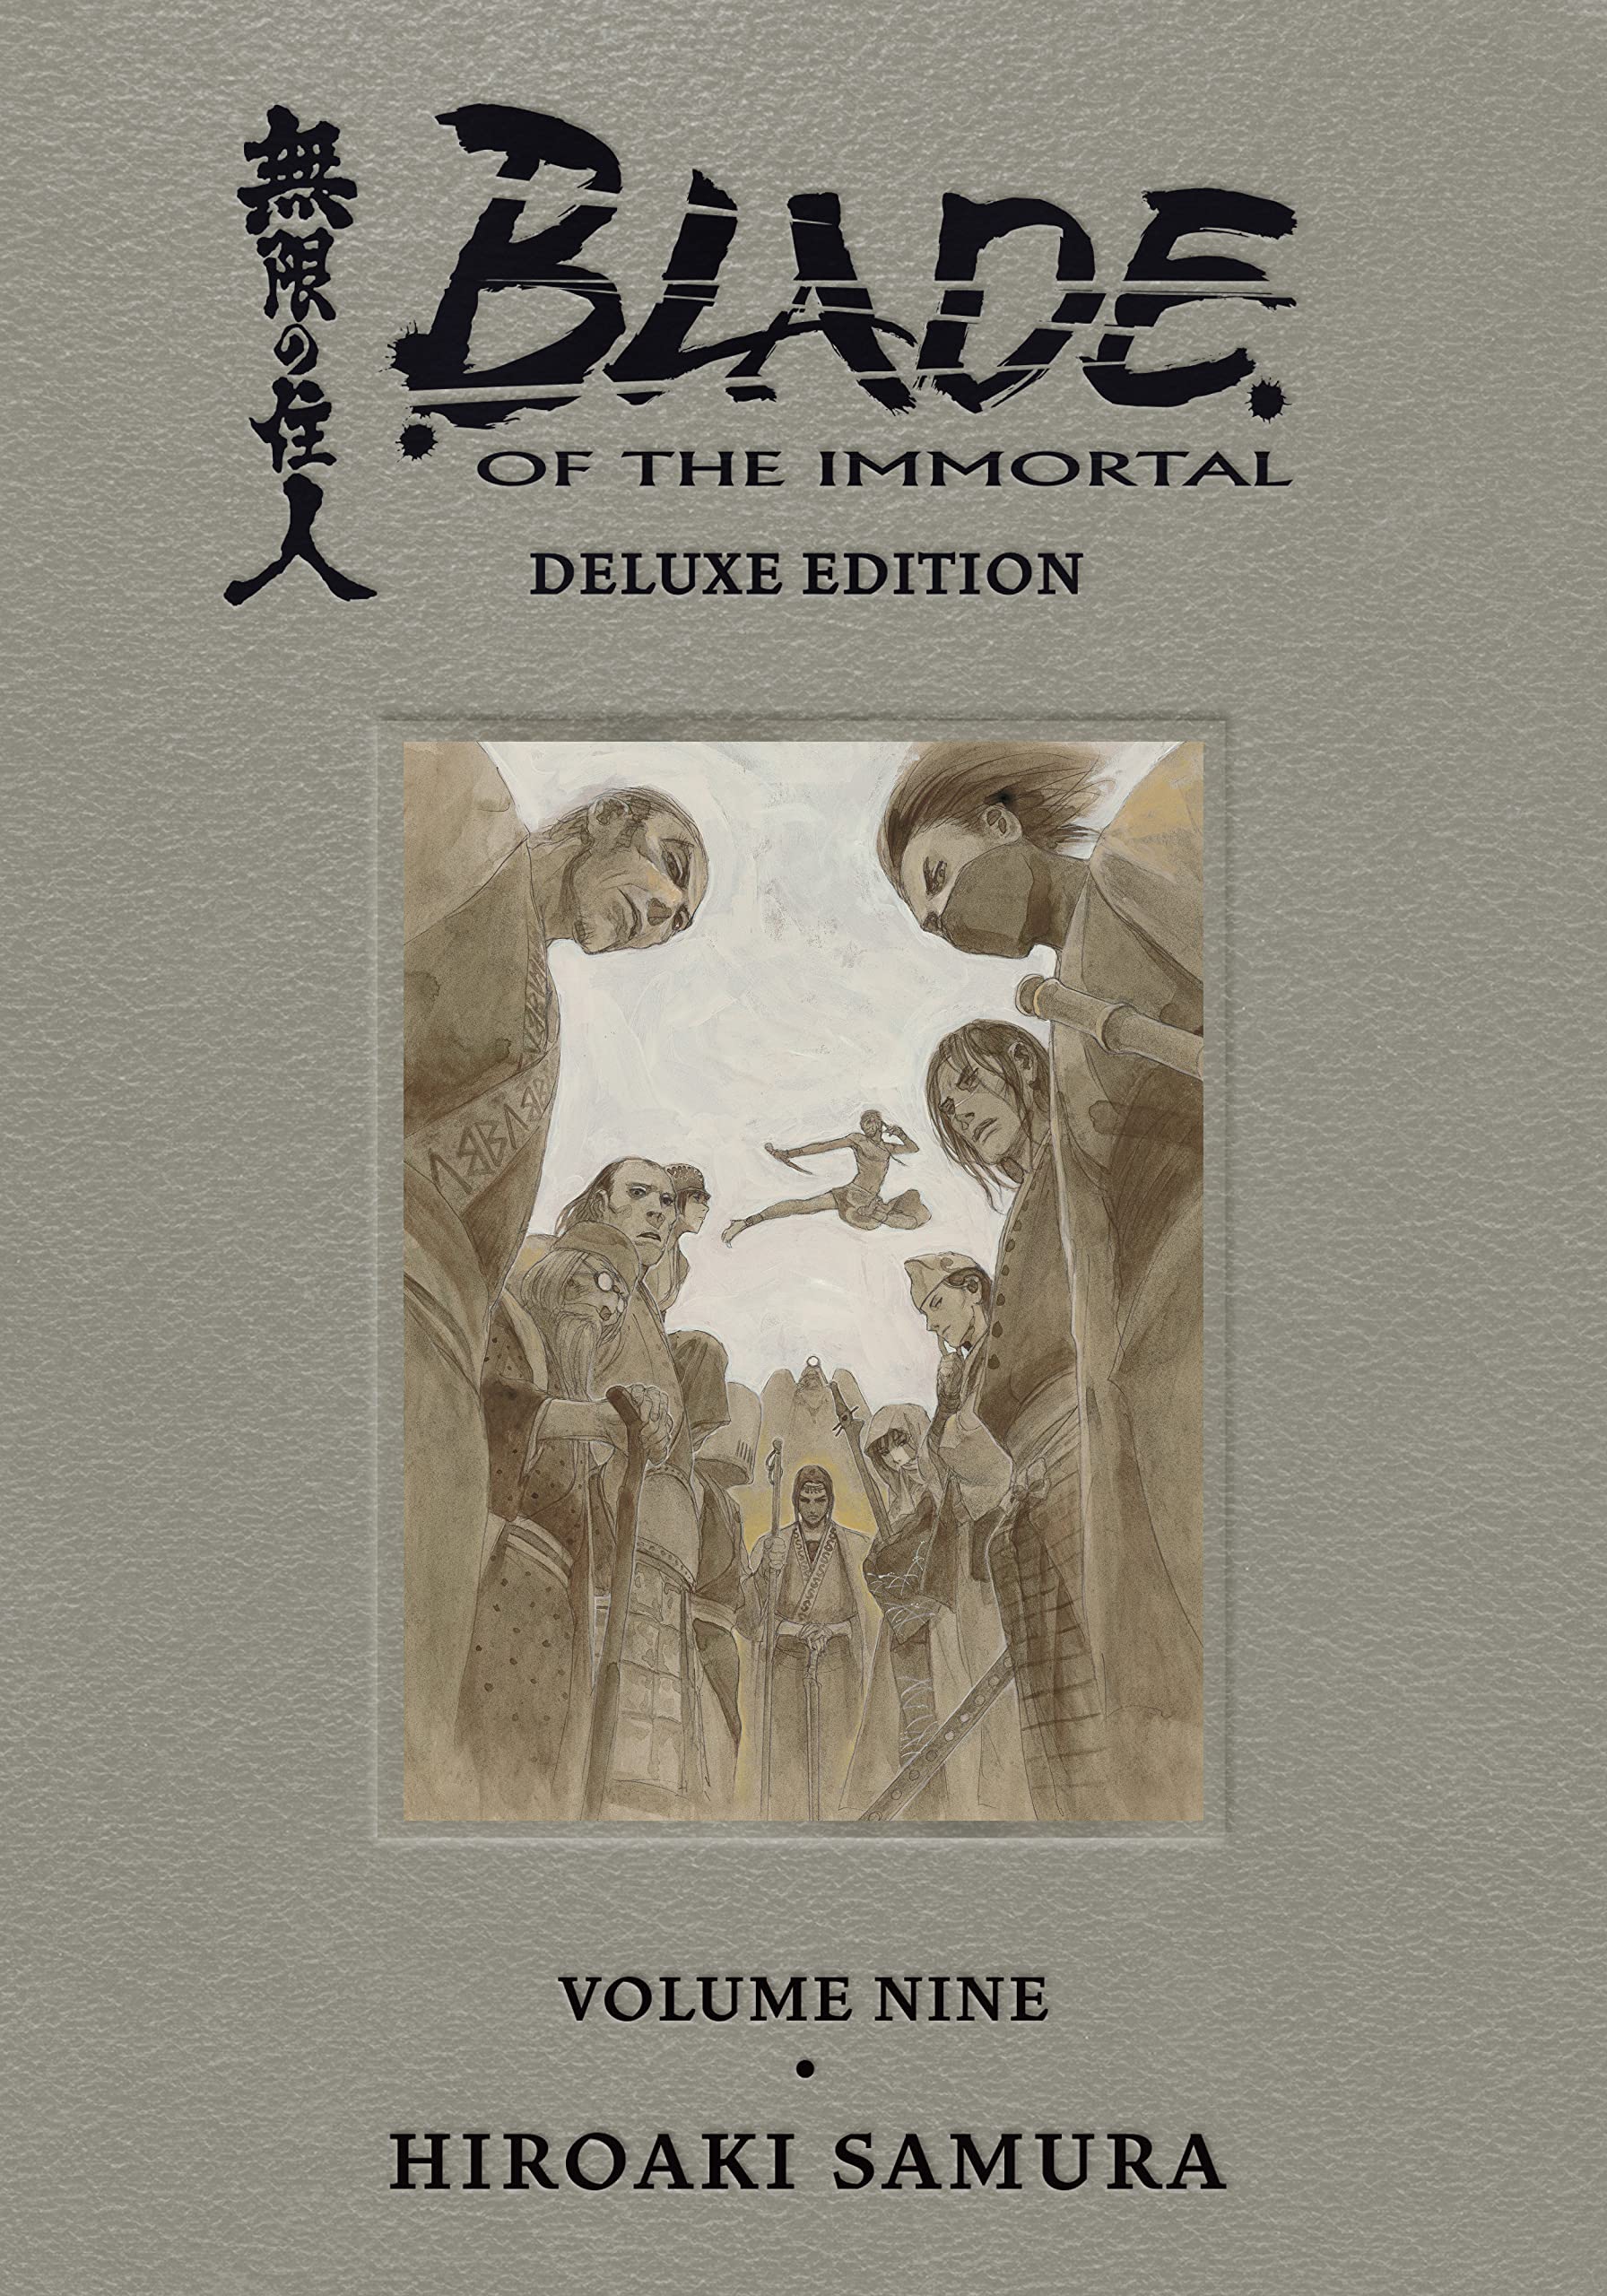 Blade of the Immortal Deluxe Edition Vol. 09